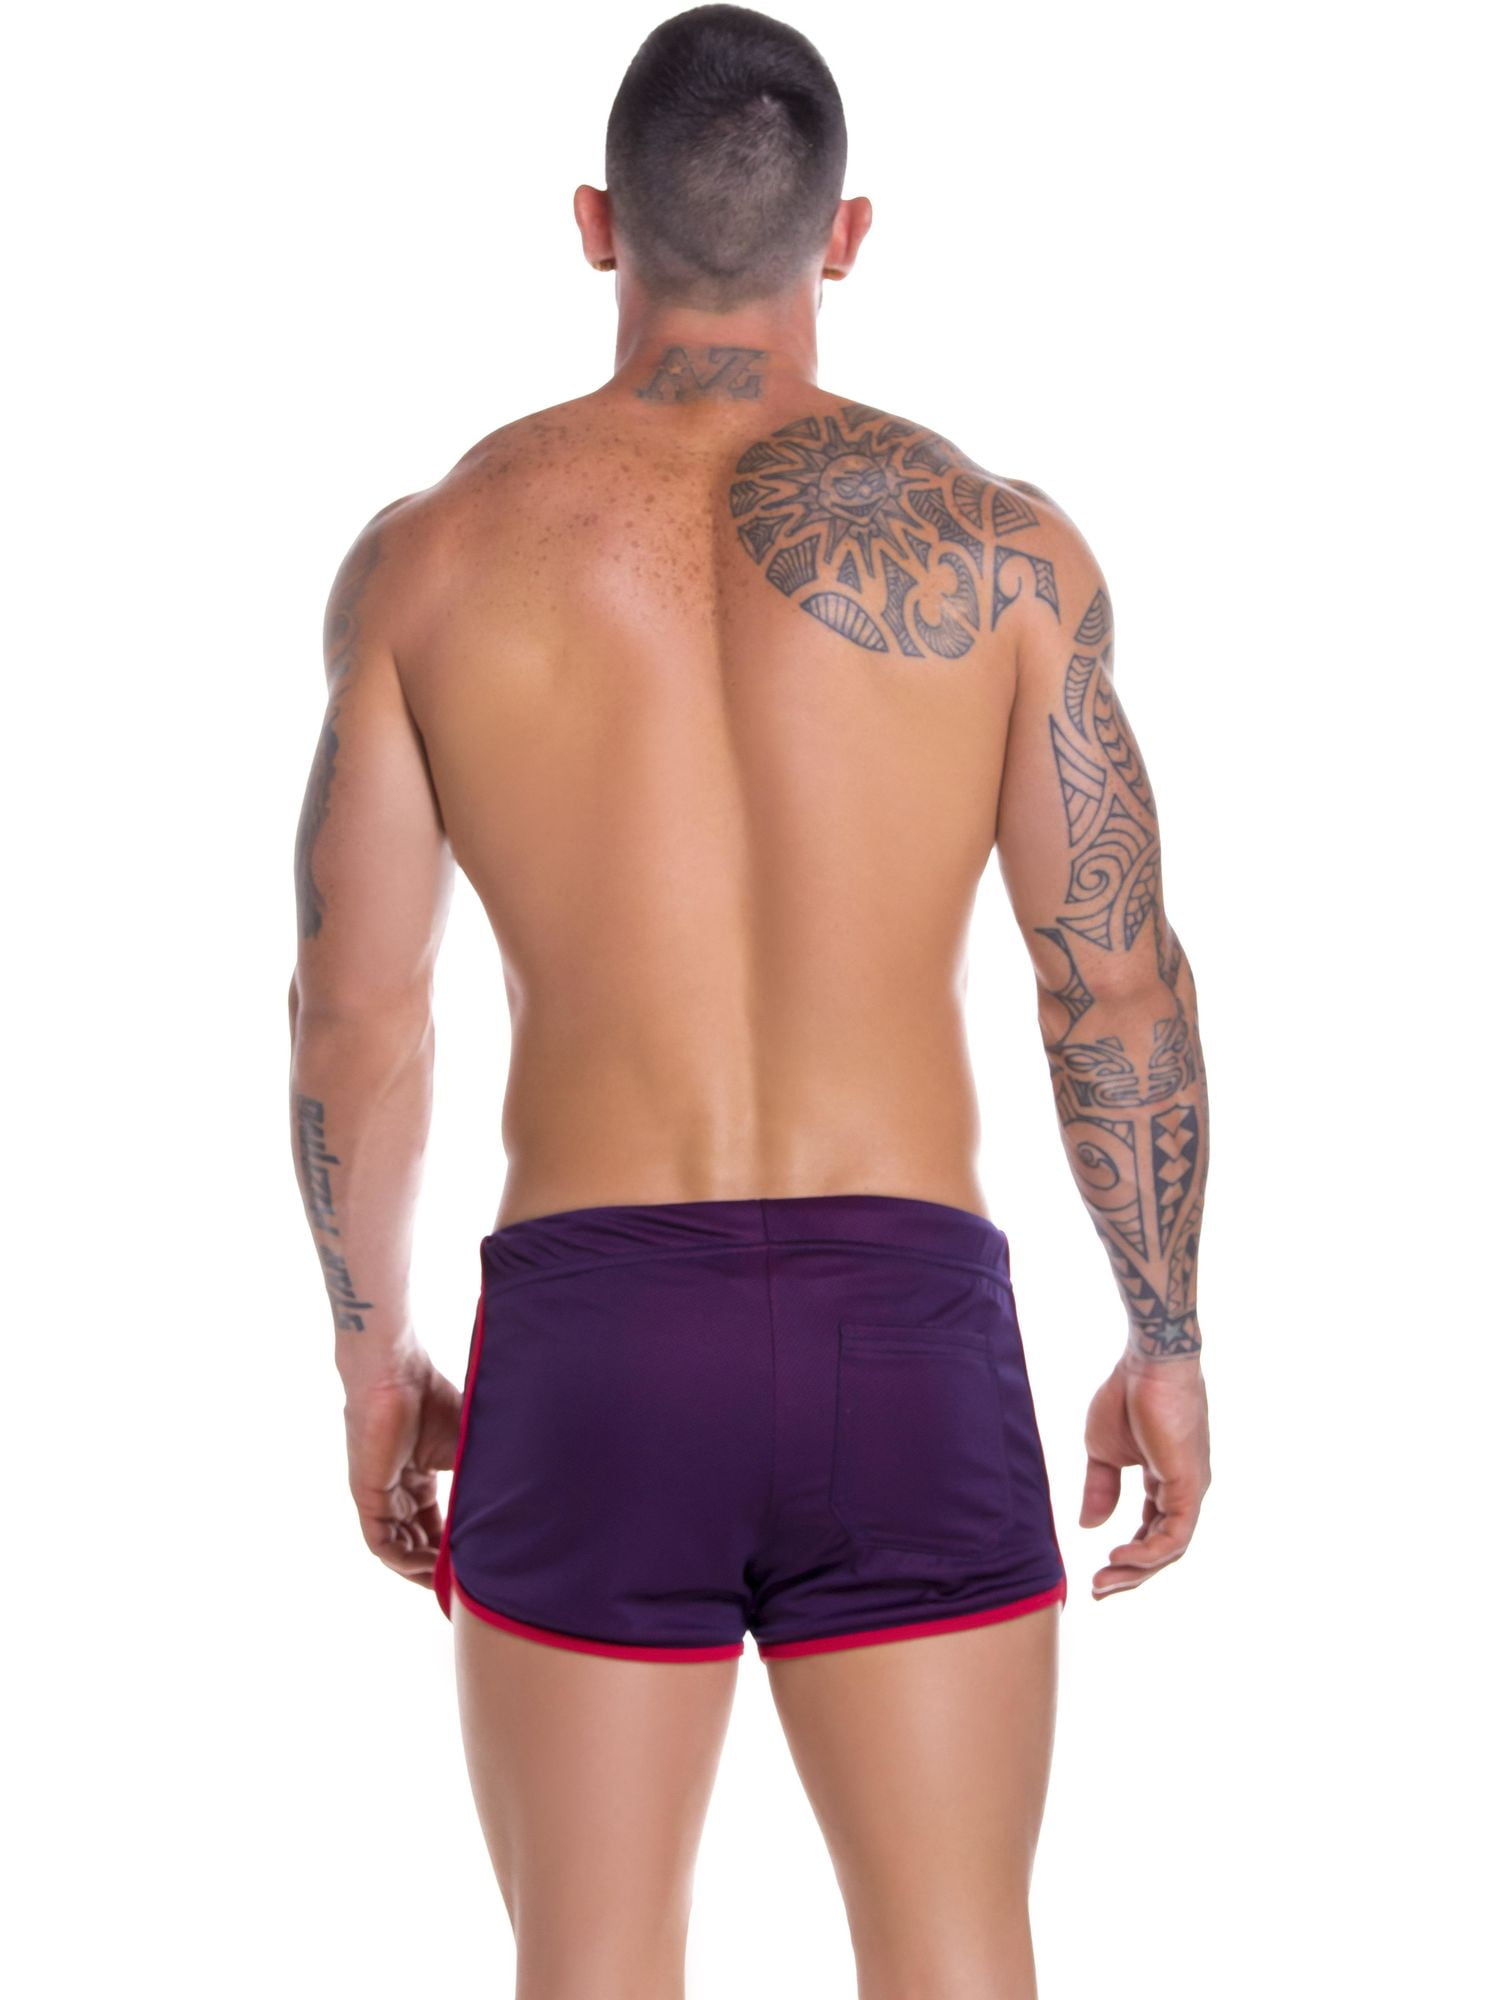 JOR 0915 Training Athletic Shorts Details about   Sportswear 